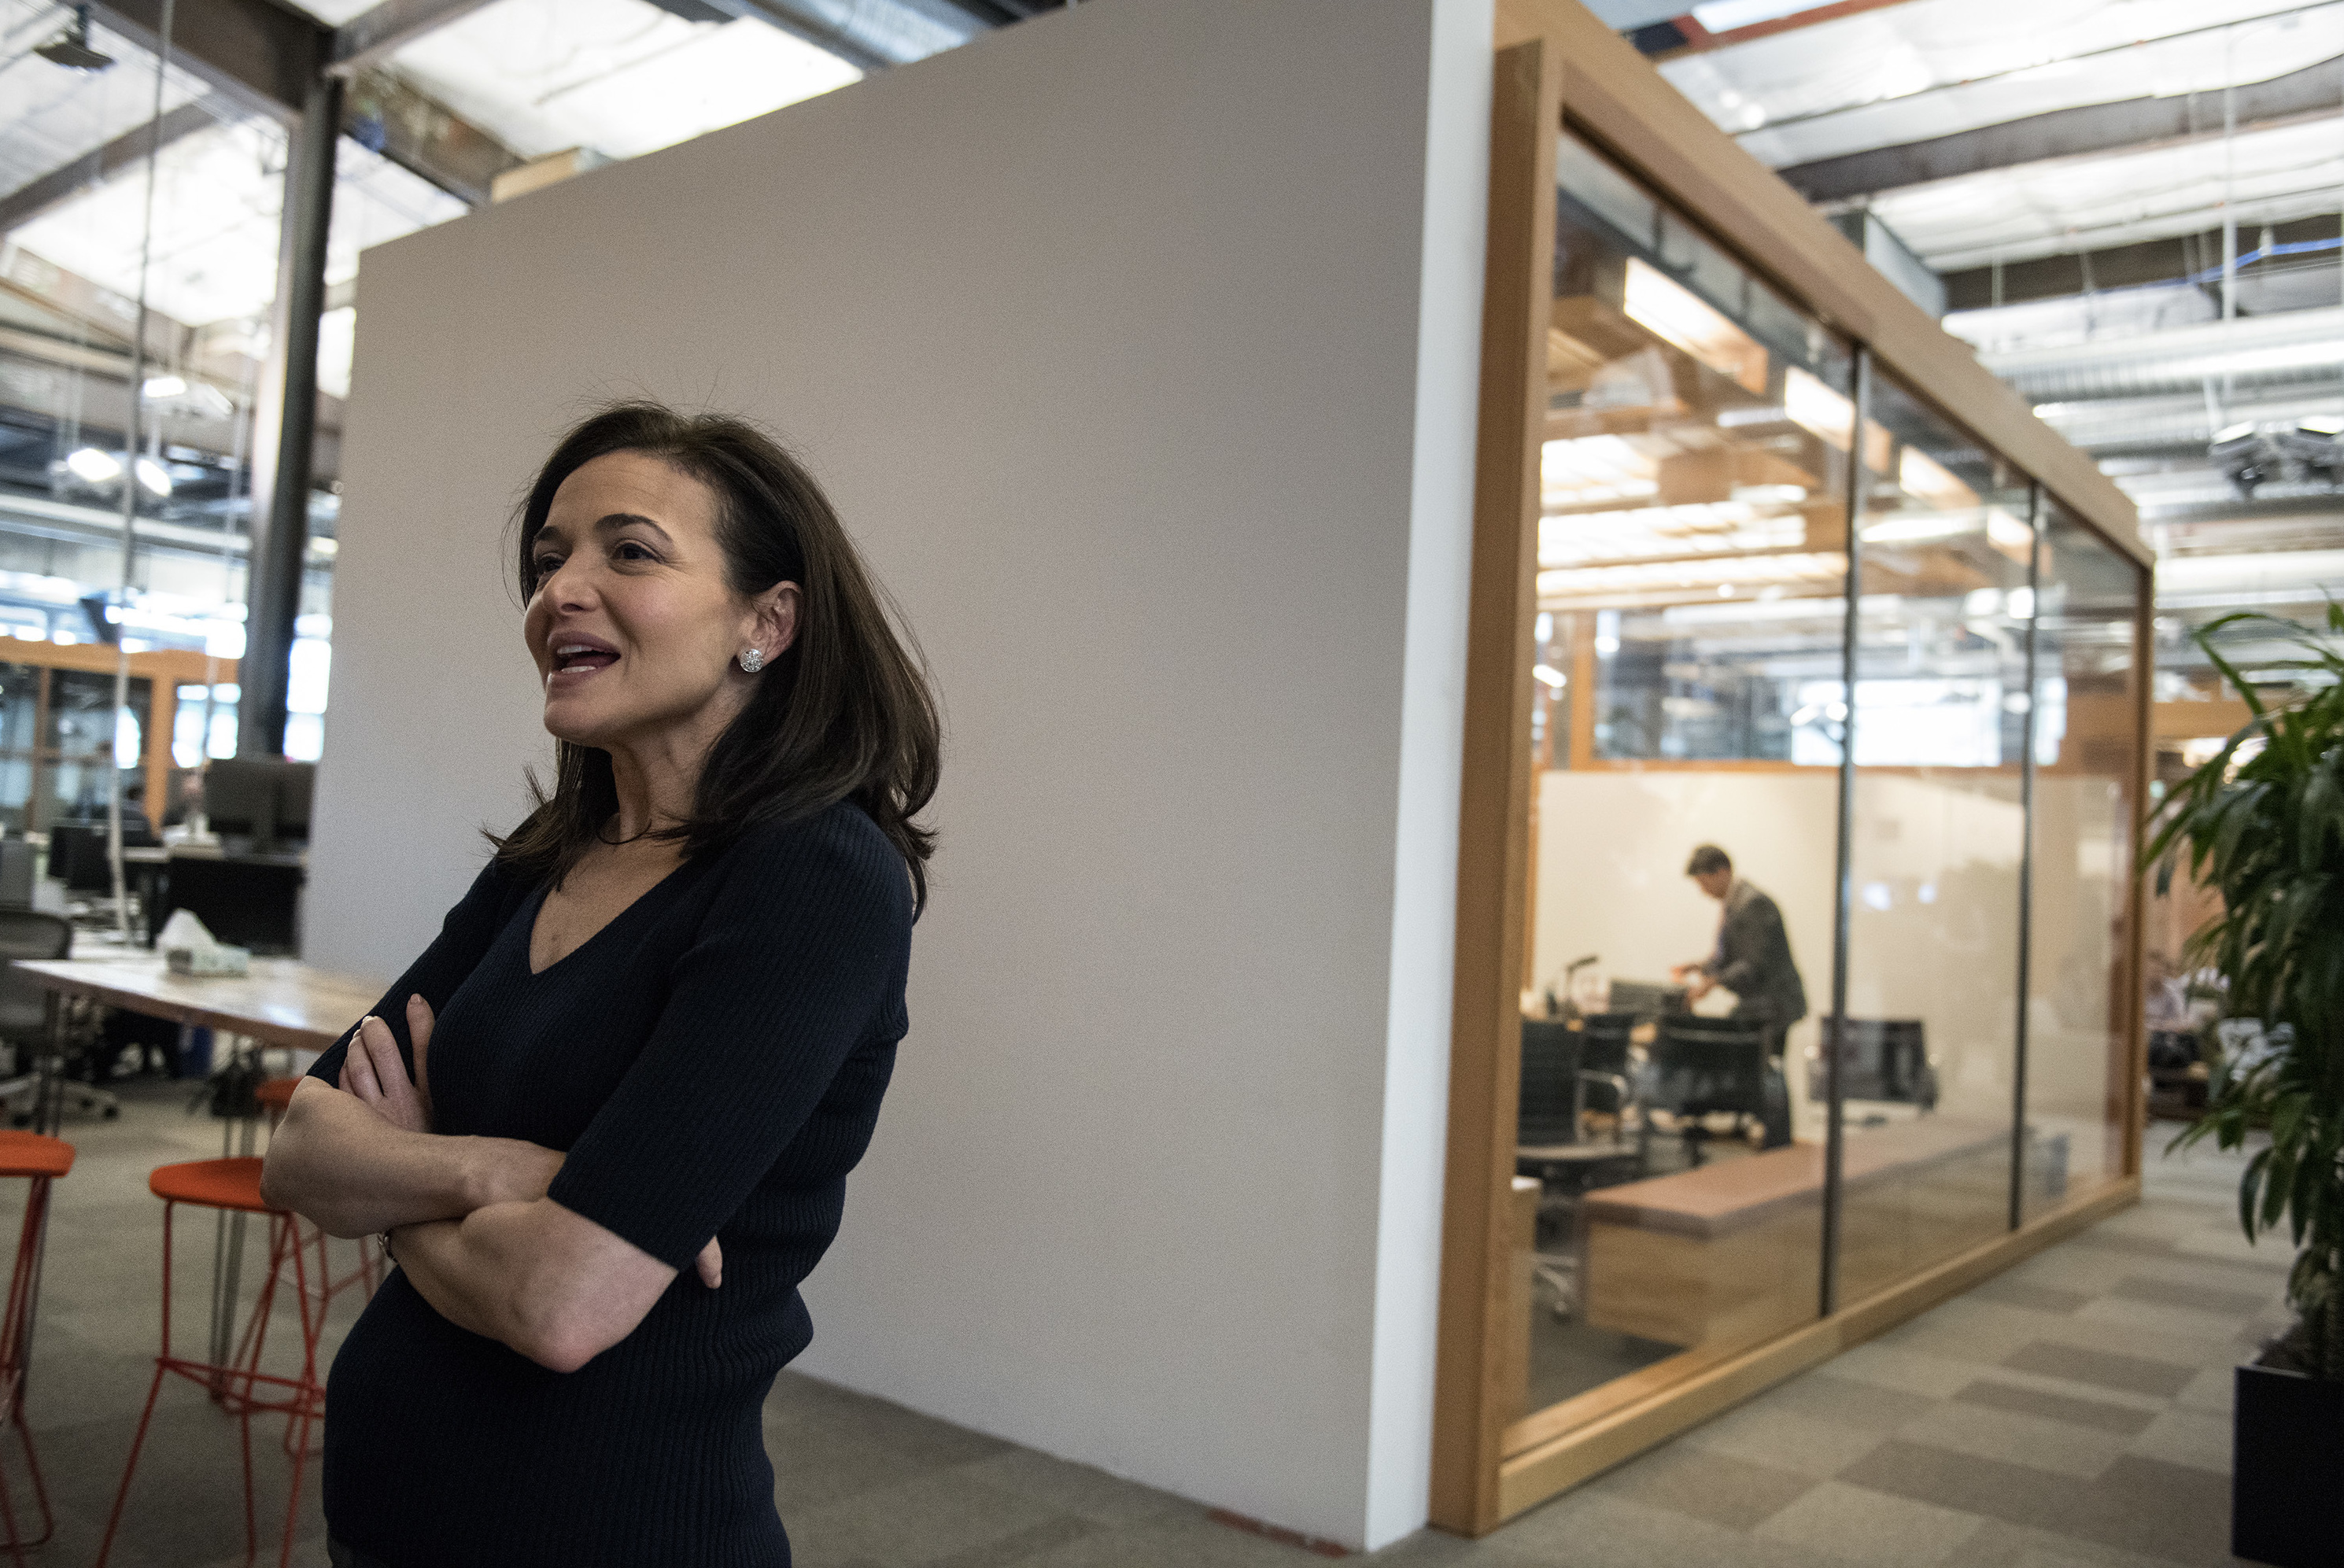 Facebook's chief operating officer, Sheryl Sandberg interviewed at the company's offices in Menlo Park, Calif., on Thursday told NPR: 